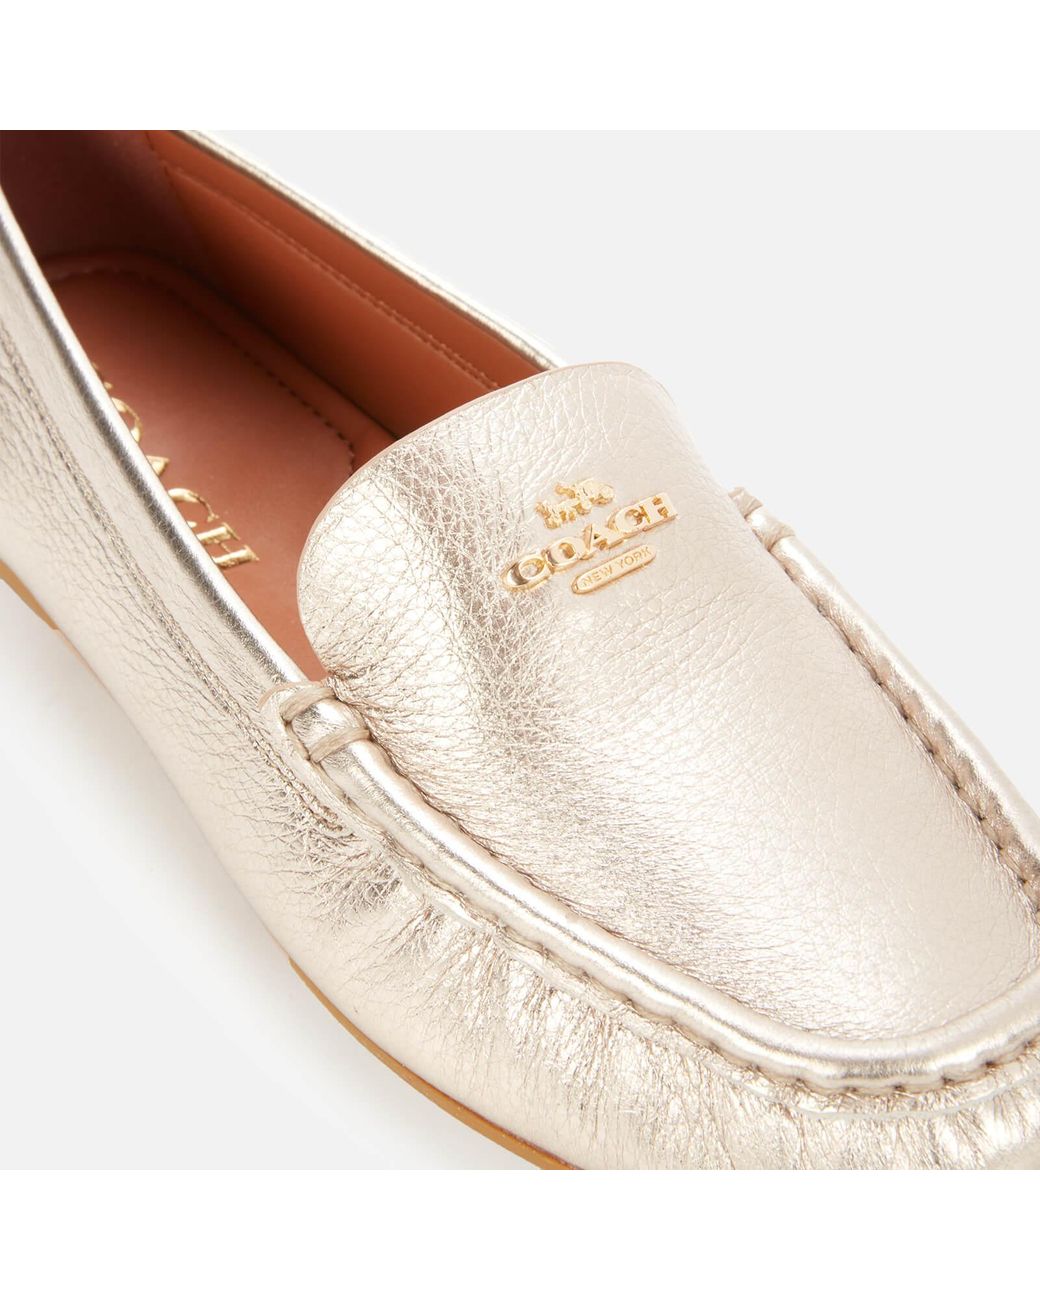 COACH Marley Metallic Leather Driving Shoes | Lyst